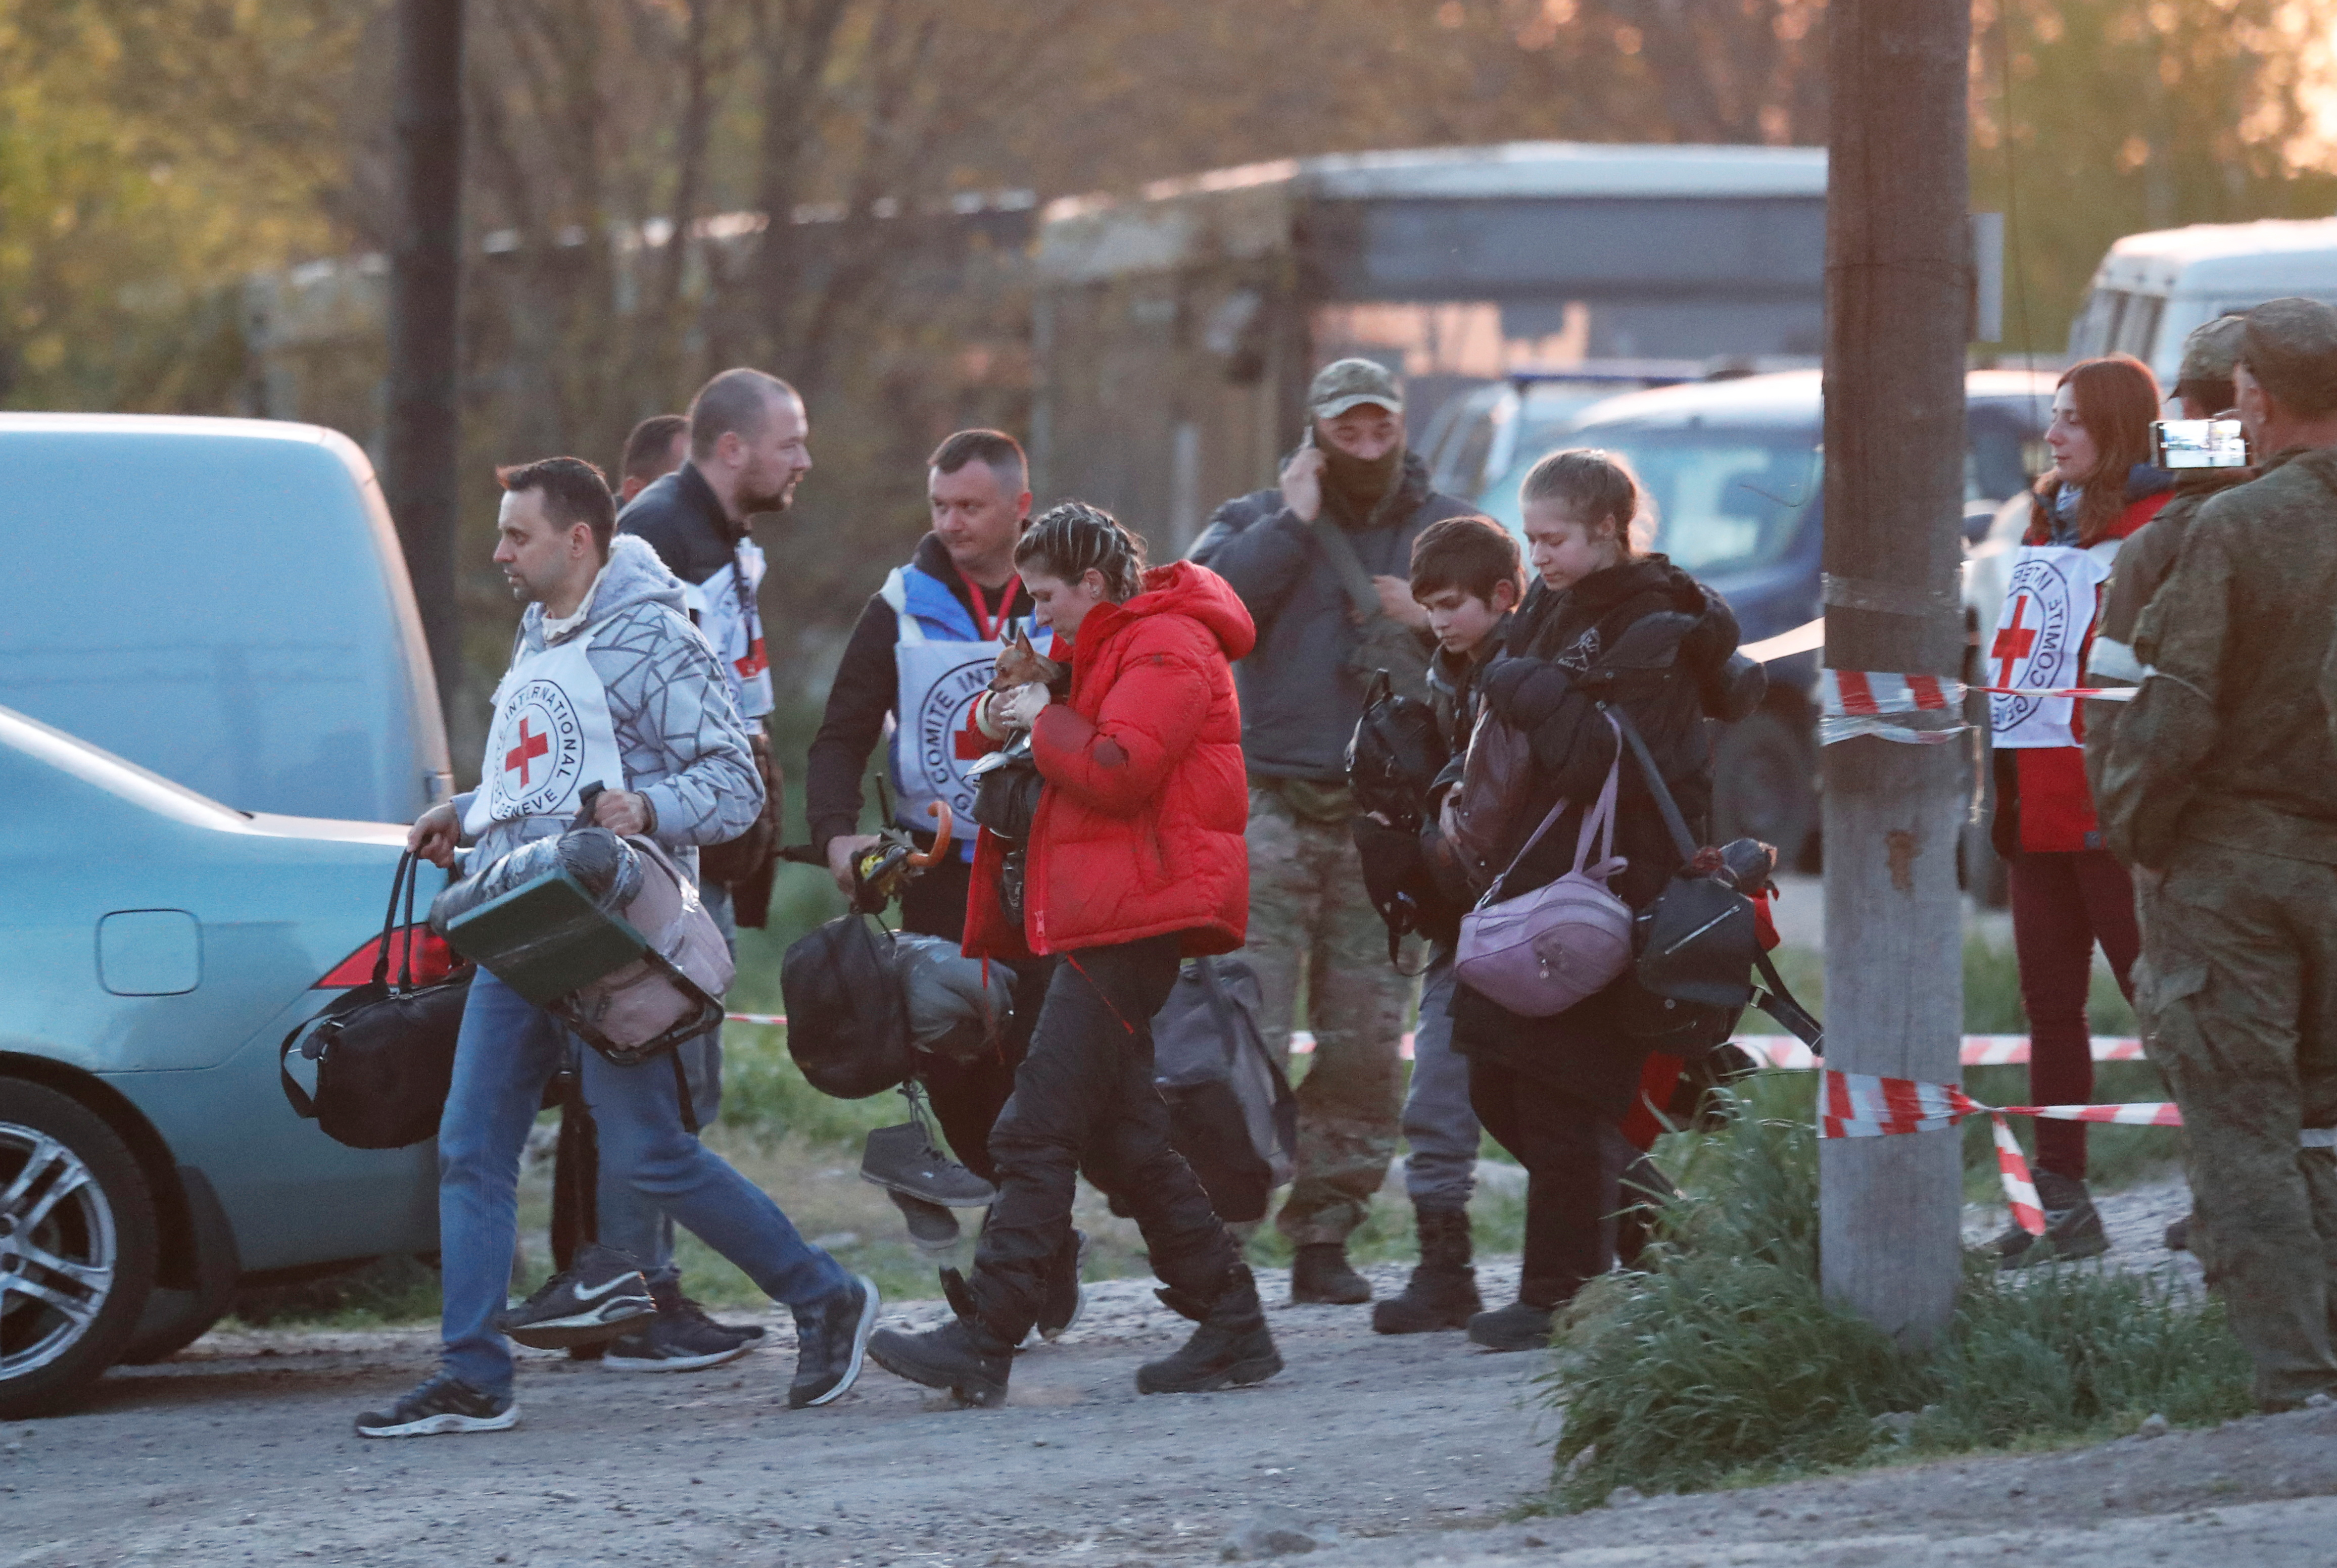 Civilians evacuated from Azovstal steel plant in Mariupol walk accompanied by members of the International Committee of the Red Cross as they arrive at a temporary accommodation center in the village of Bezimenne to the east of Mariupol, Ukraine on May 6.